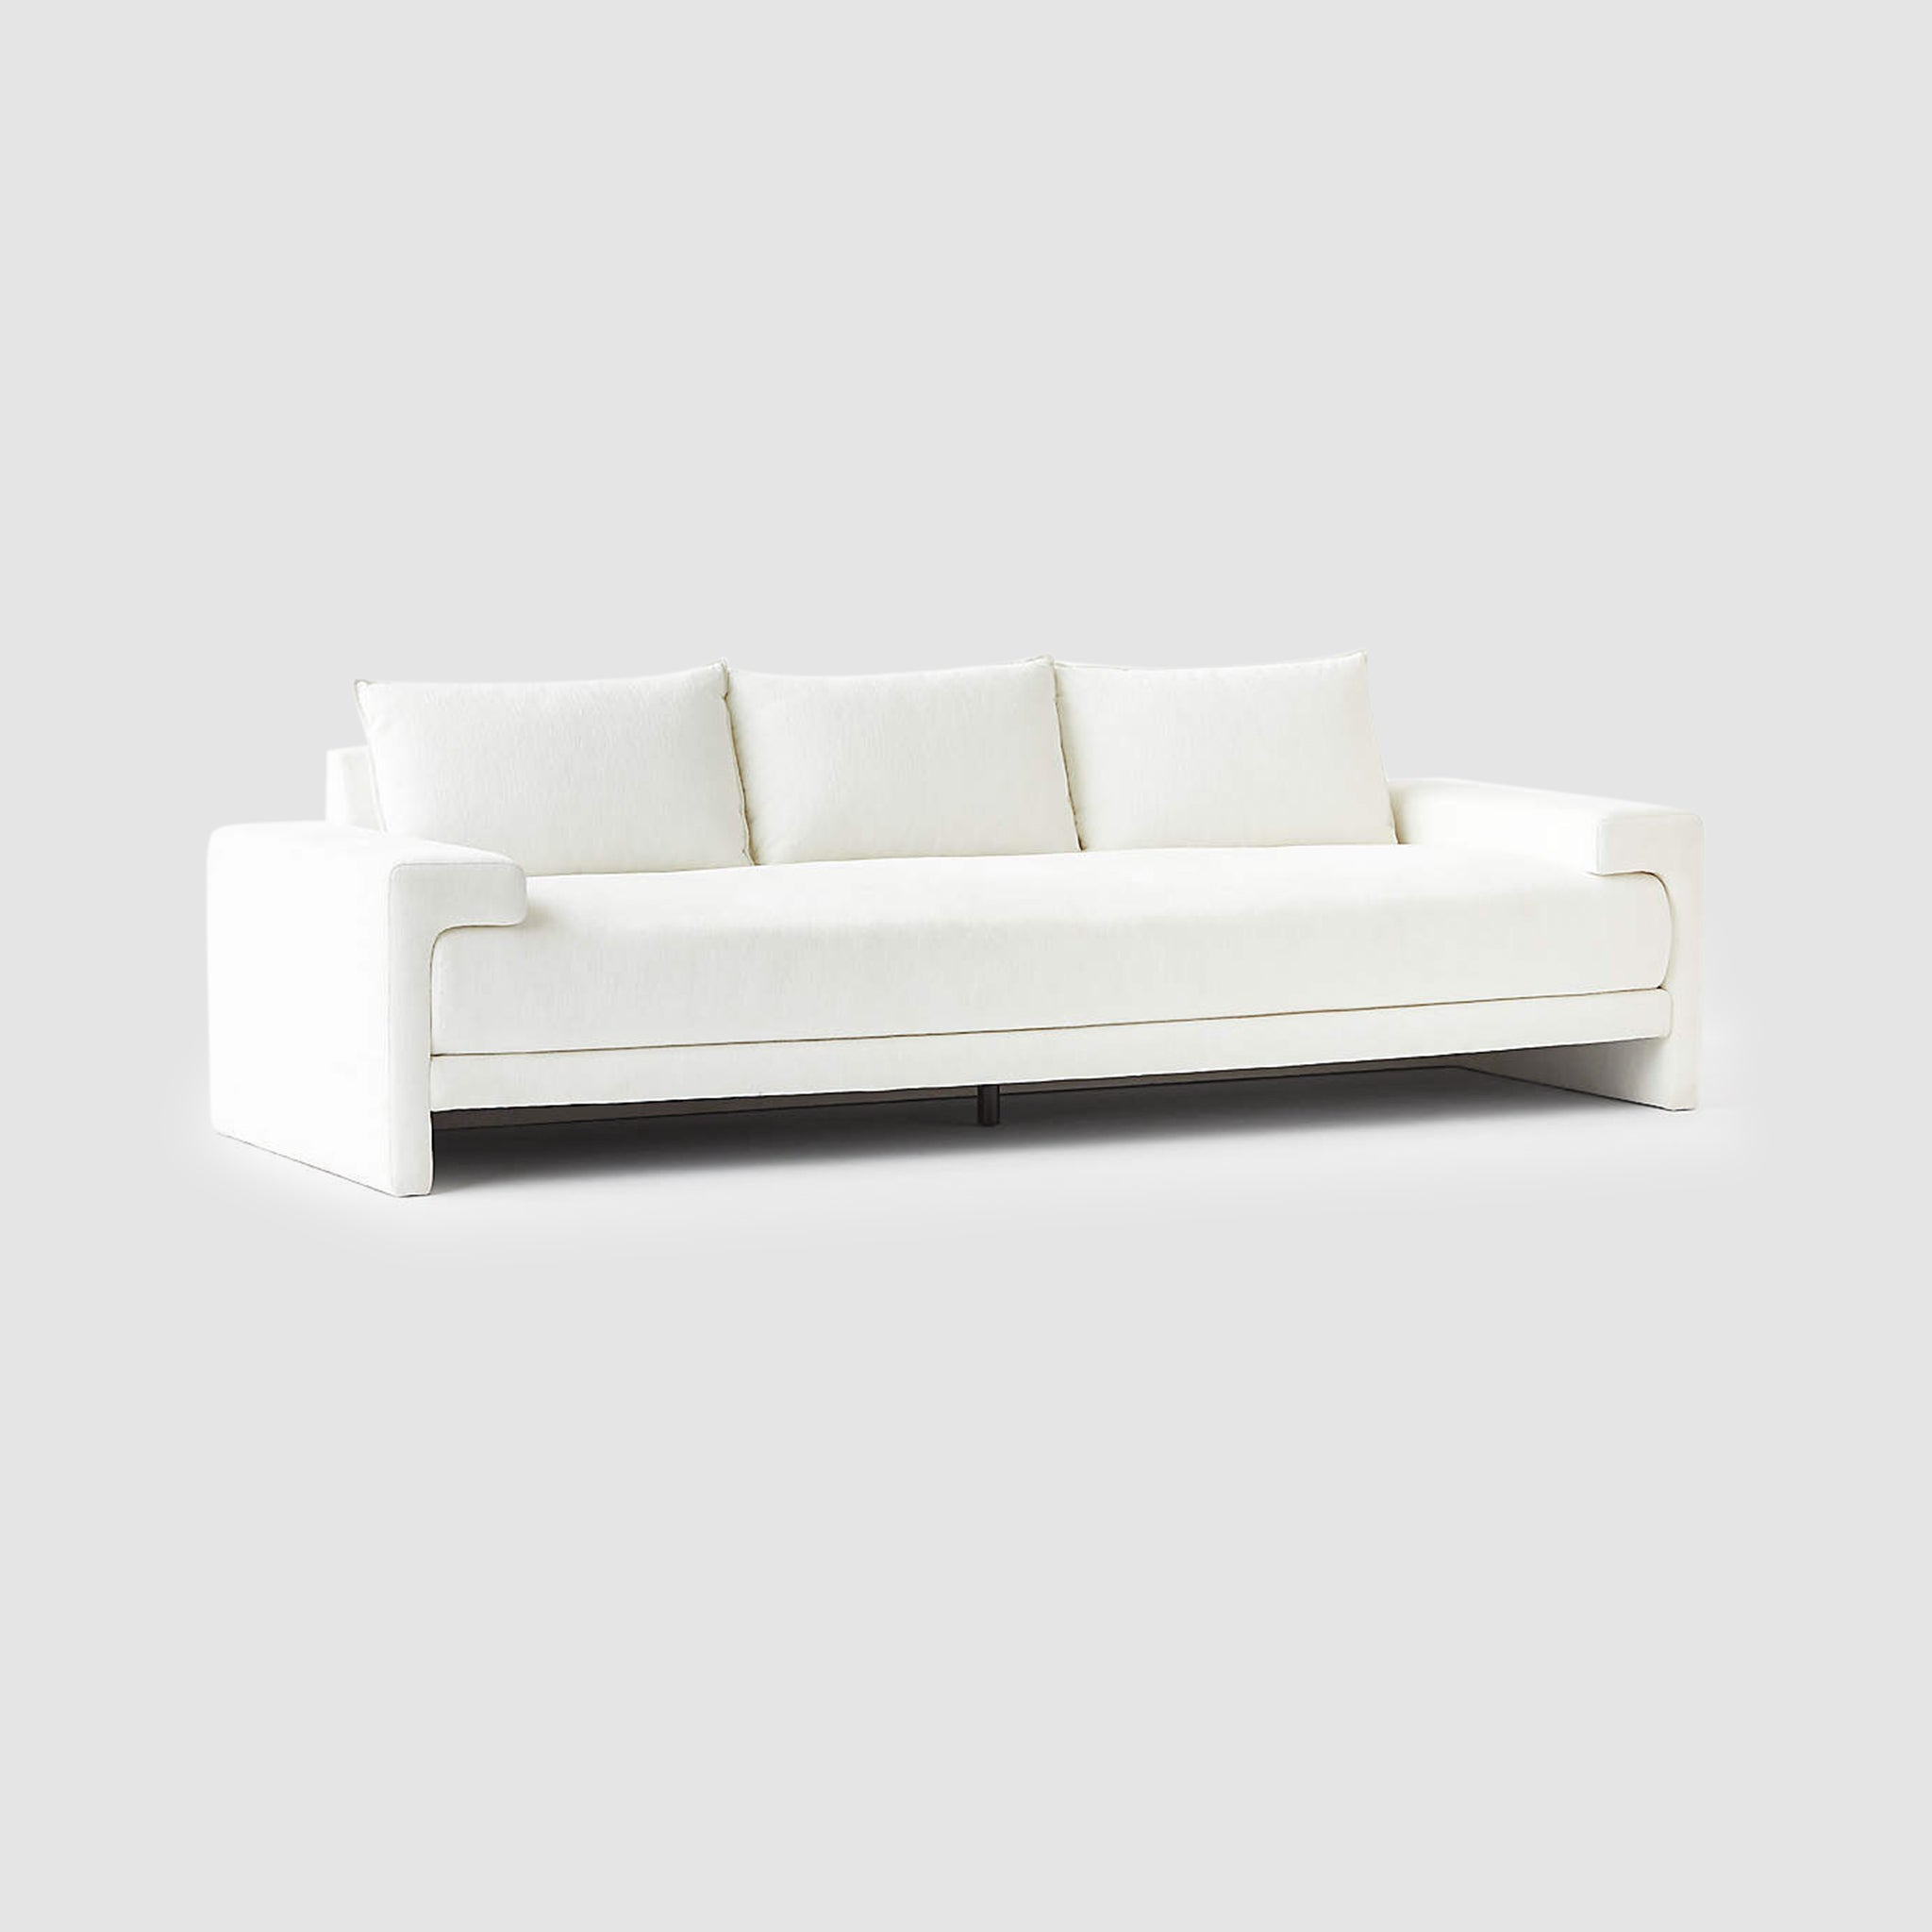 Modern minimalist white Sylvia sofa with plush cushions, clean lines, and contemporary design for a stylish living room